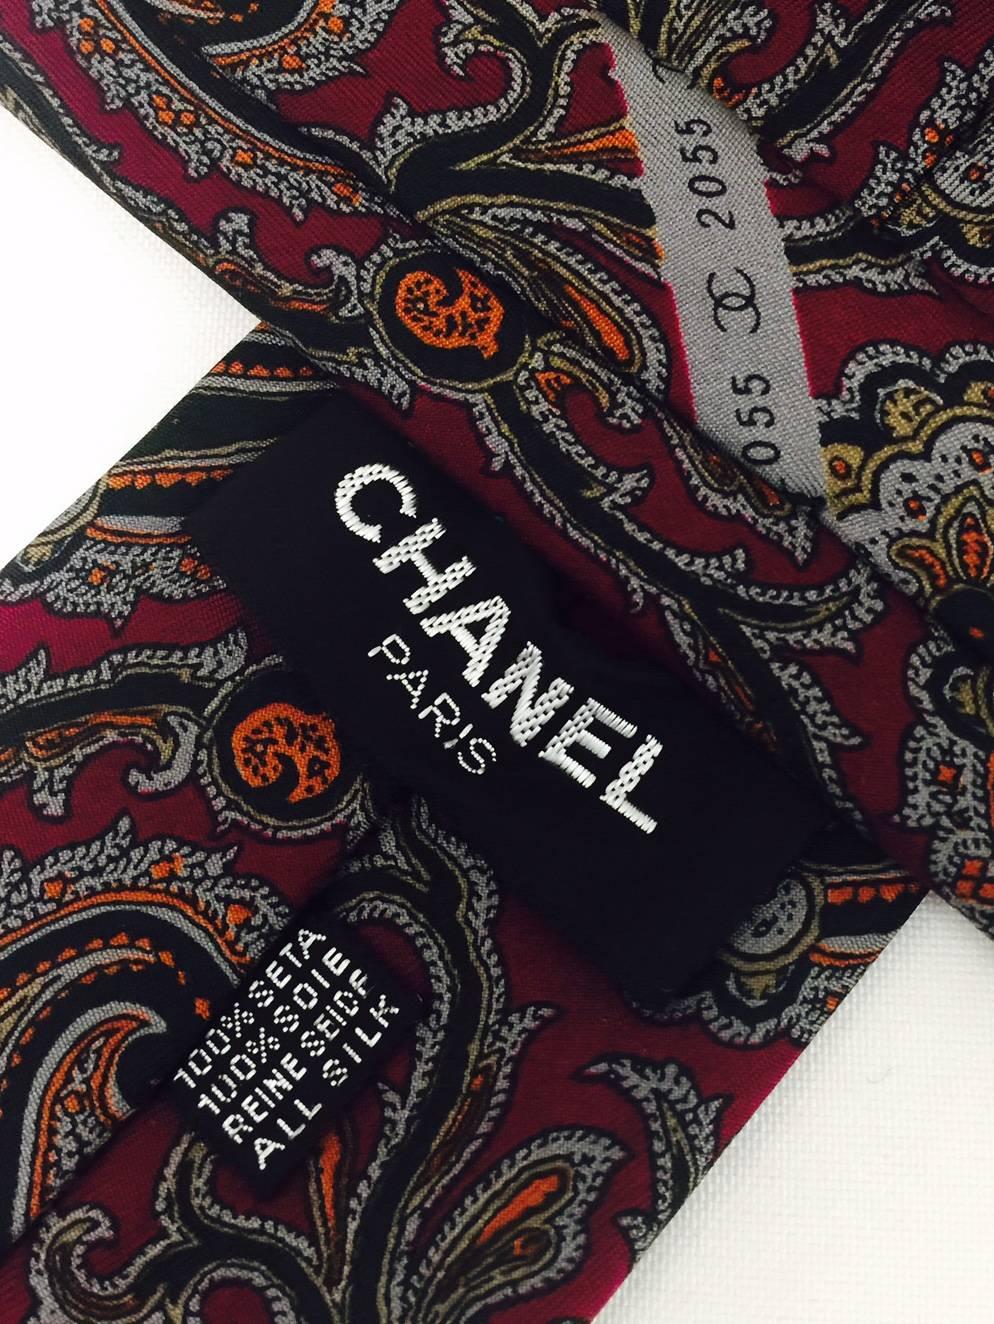 Champion Chanel signature design on this updated Paisley print throughout the tie.  Made of 100% silk with a deep burgundy background.  
Measurements:  Length - 57